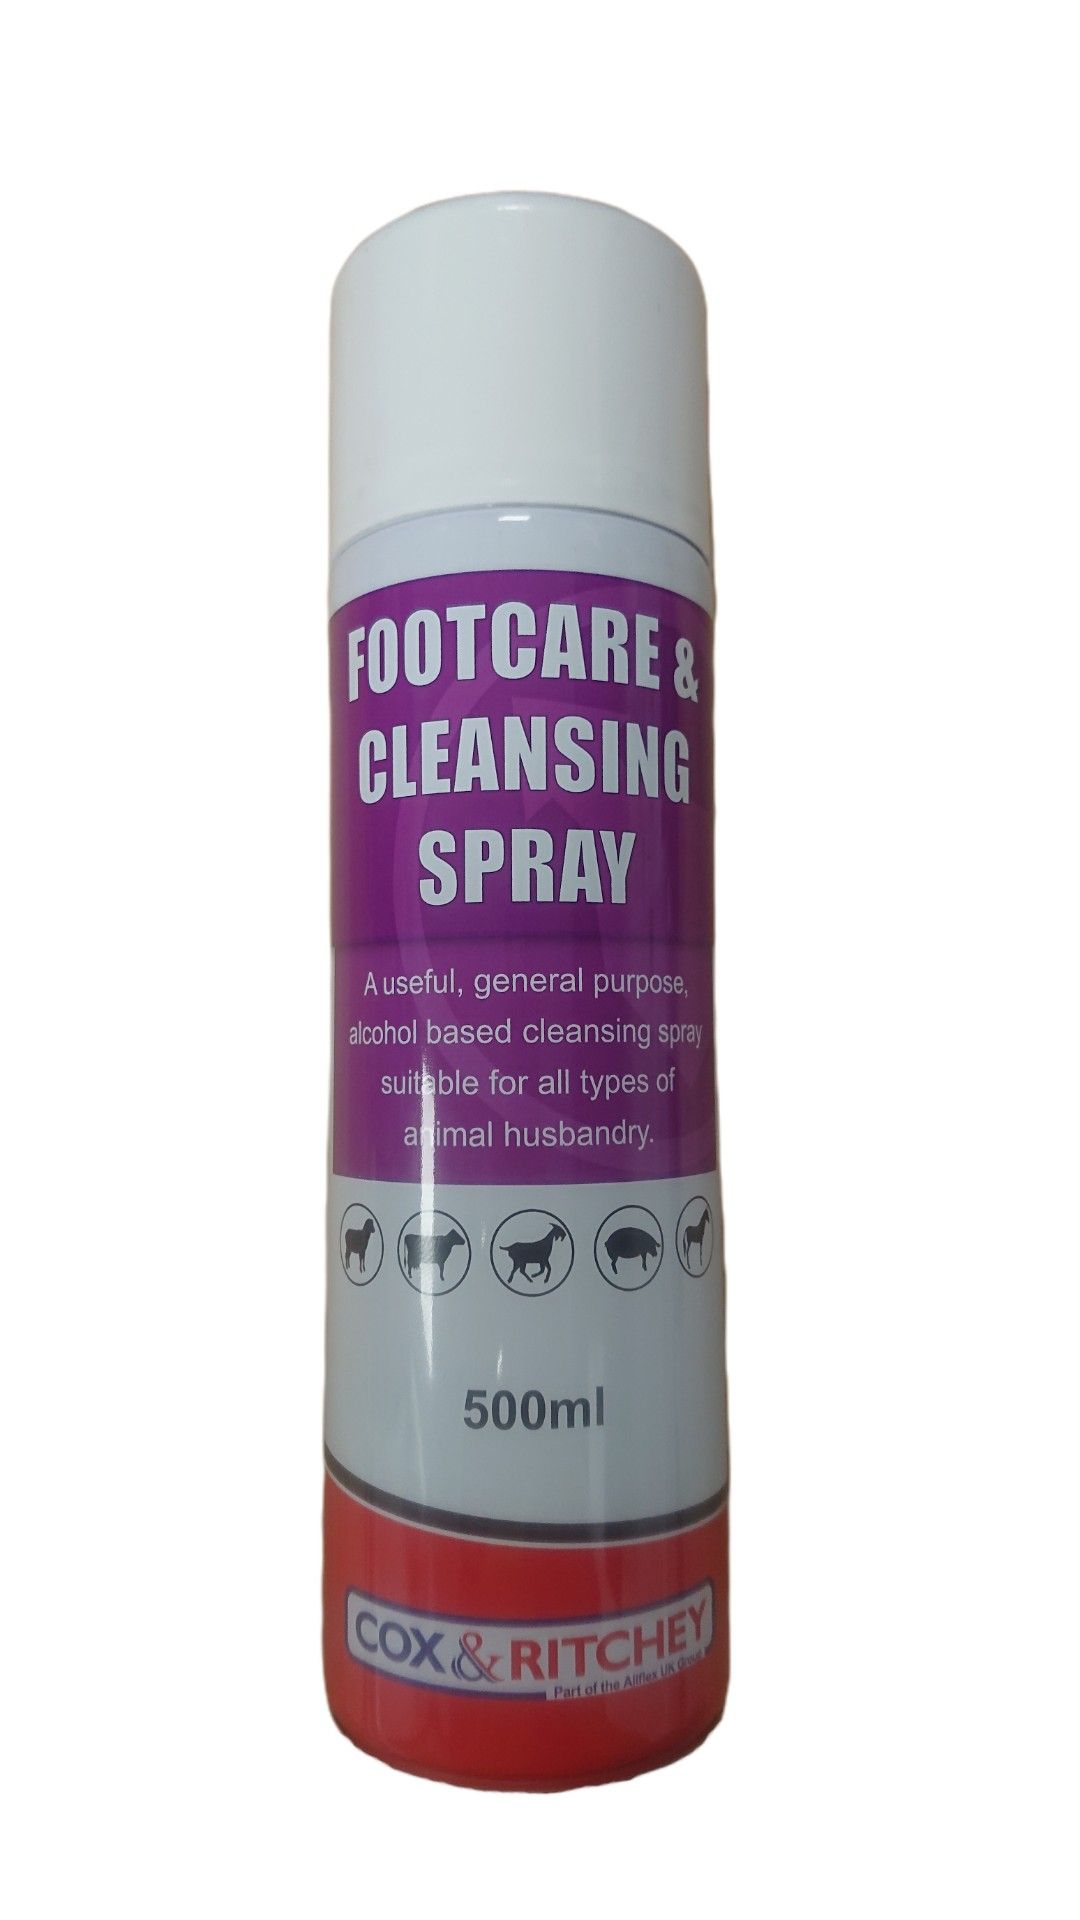 Footcare & Cleansing Spray